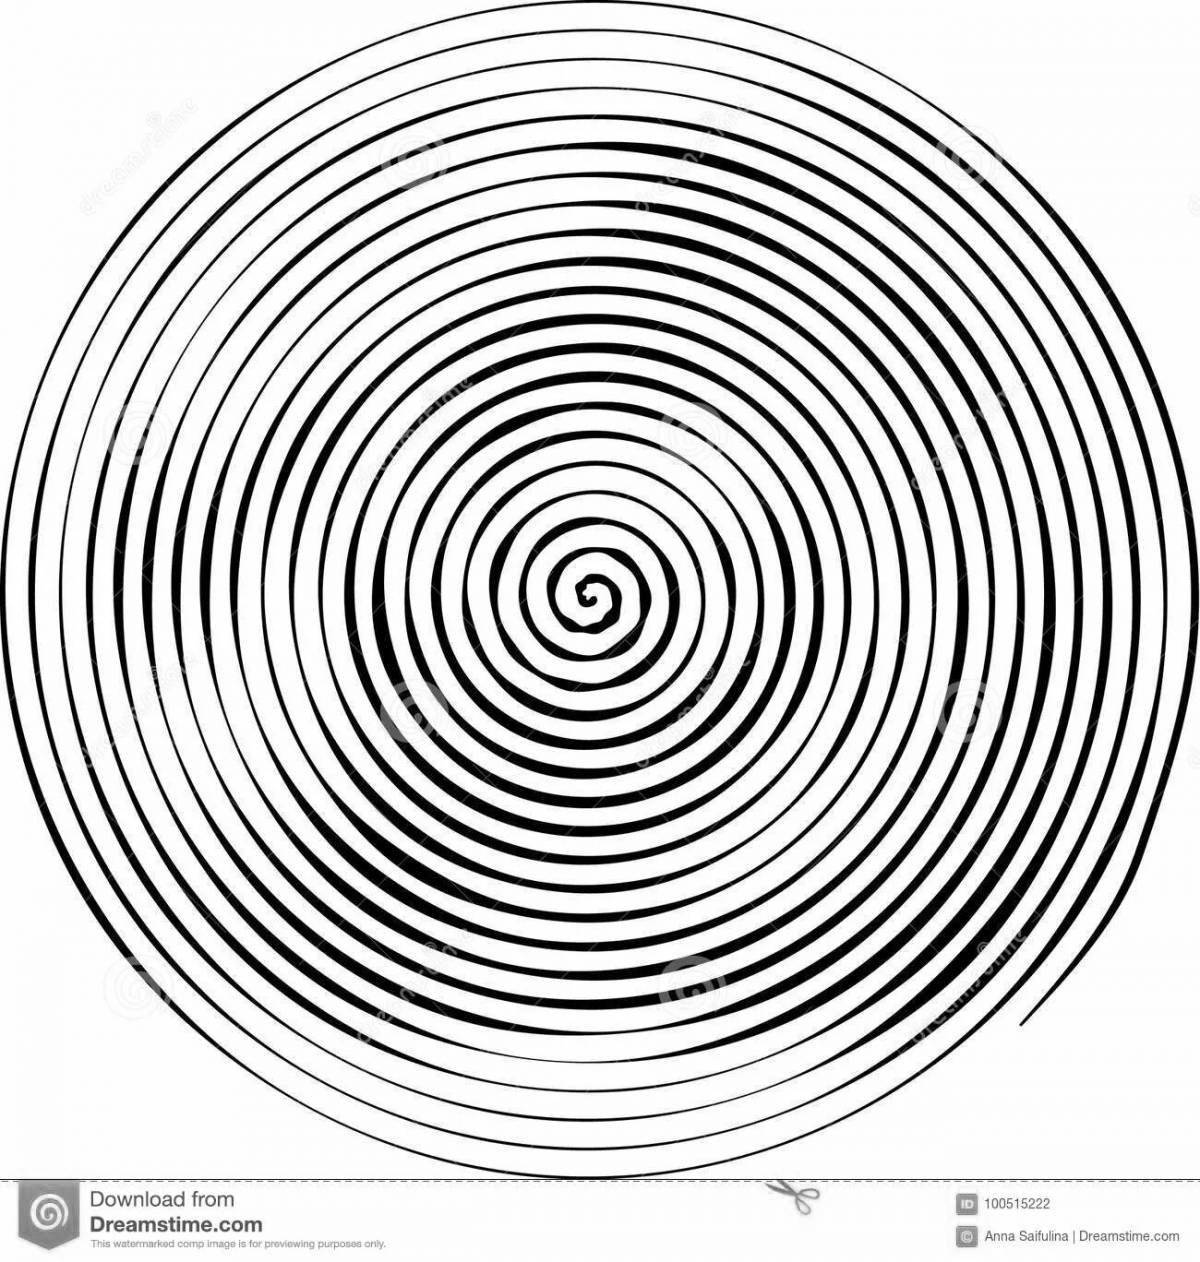 Coloring page gorgeous striped circle